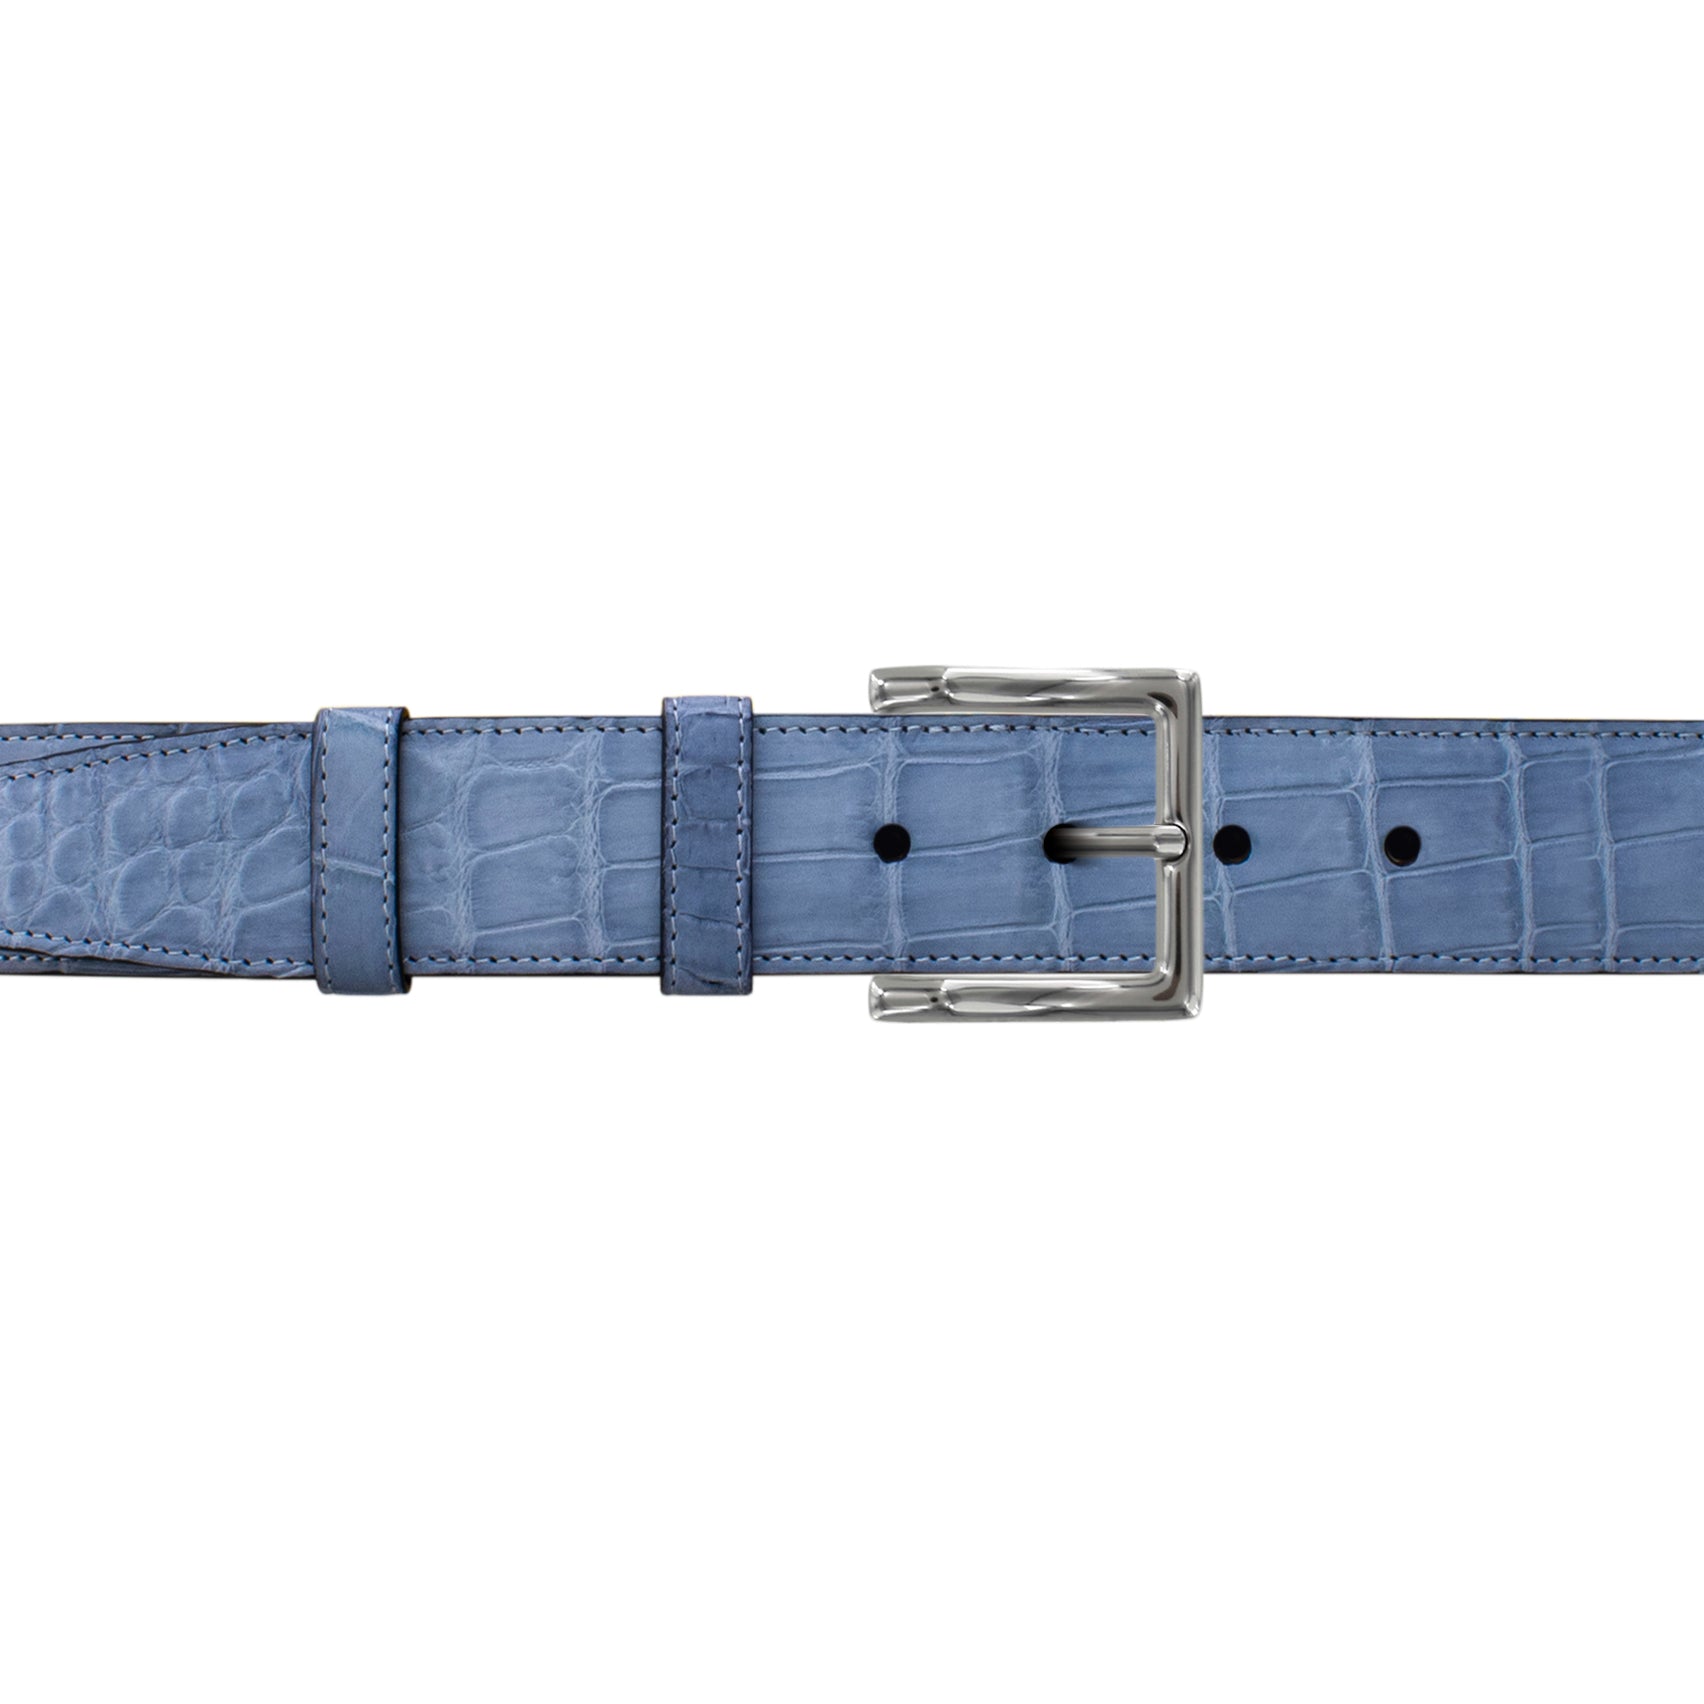 1 1/2" Arctic Classic Belt with Regis Dress Buckle in Polished Nickel